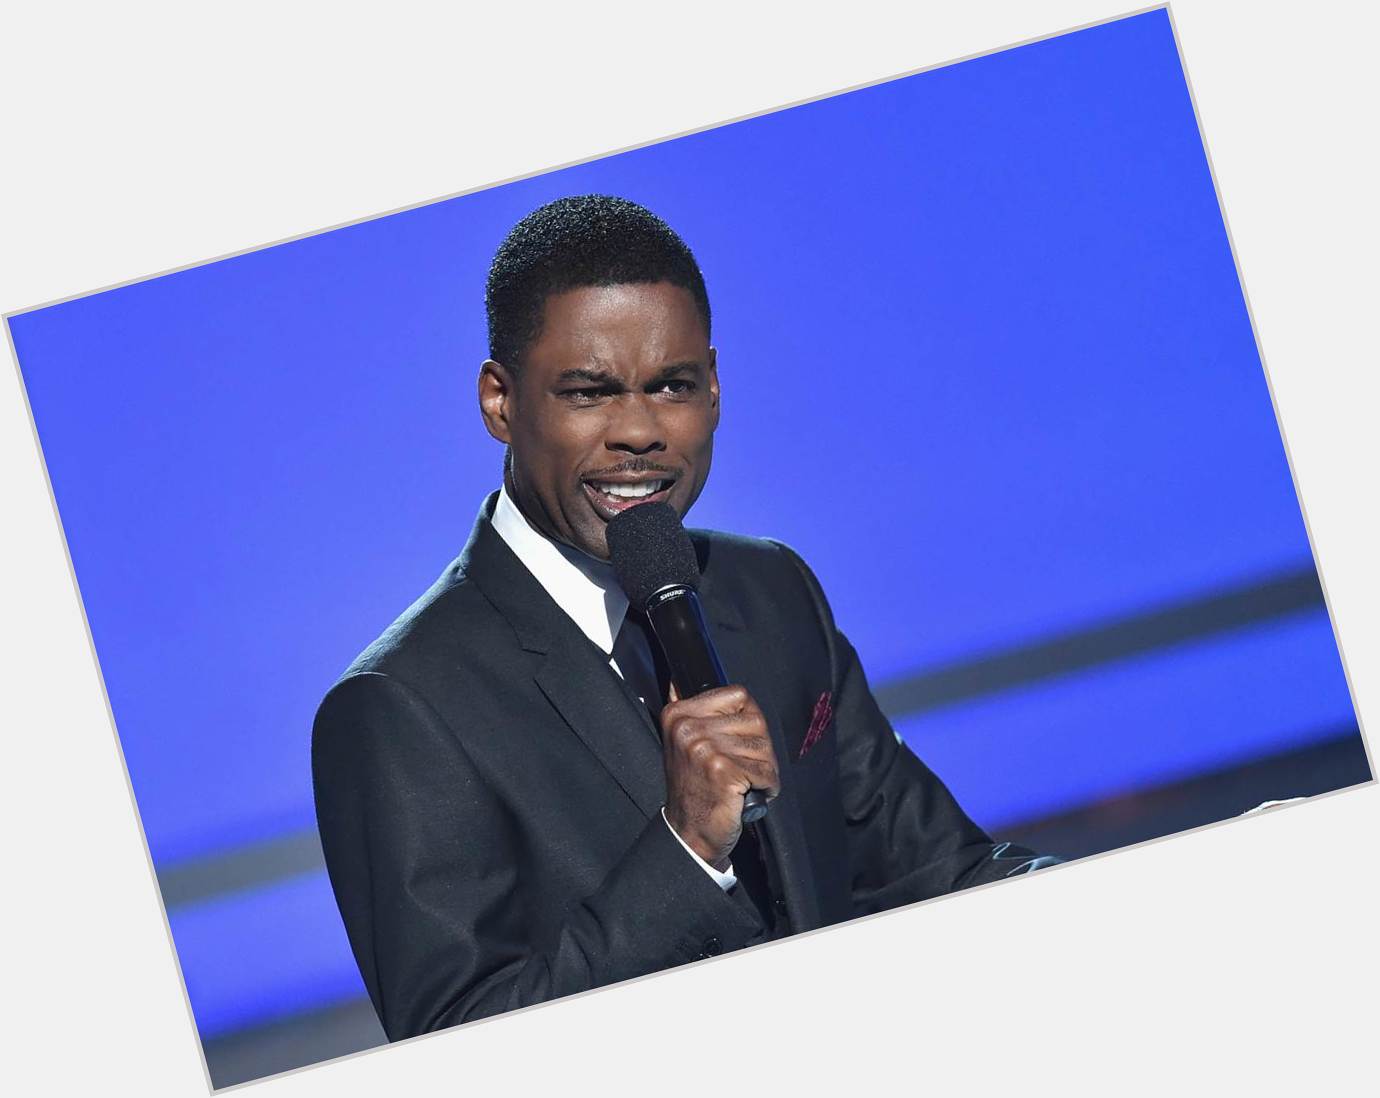 Chris Rock turns 51 on this day, in 1965. Wish him a Happy Birthday. 